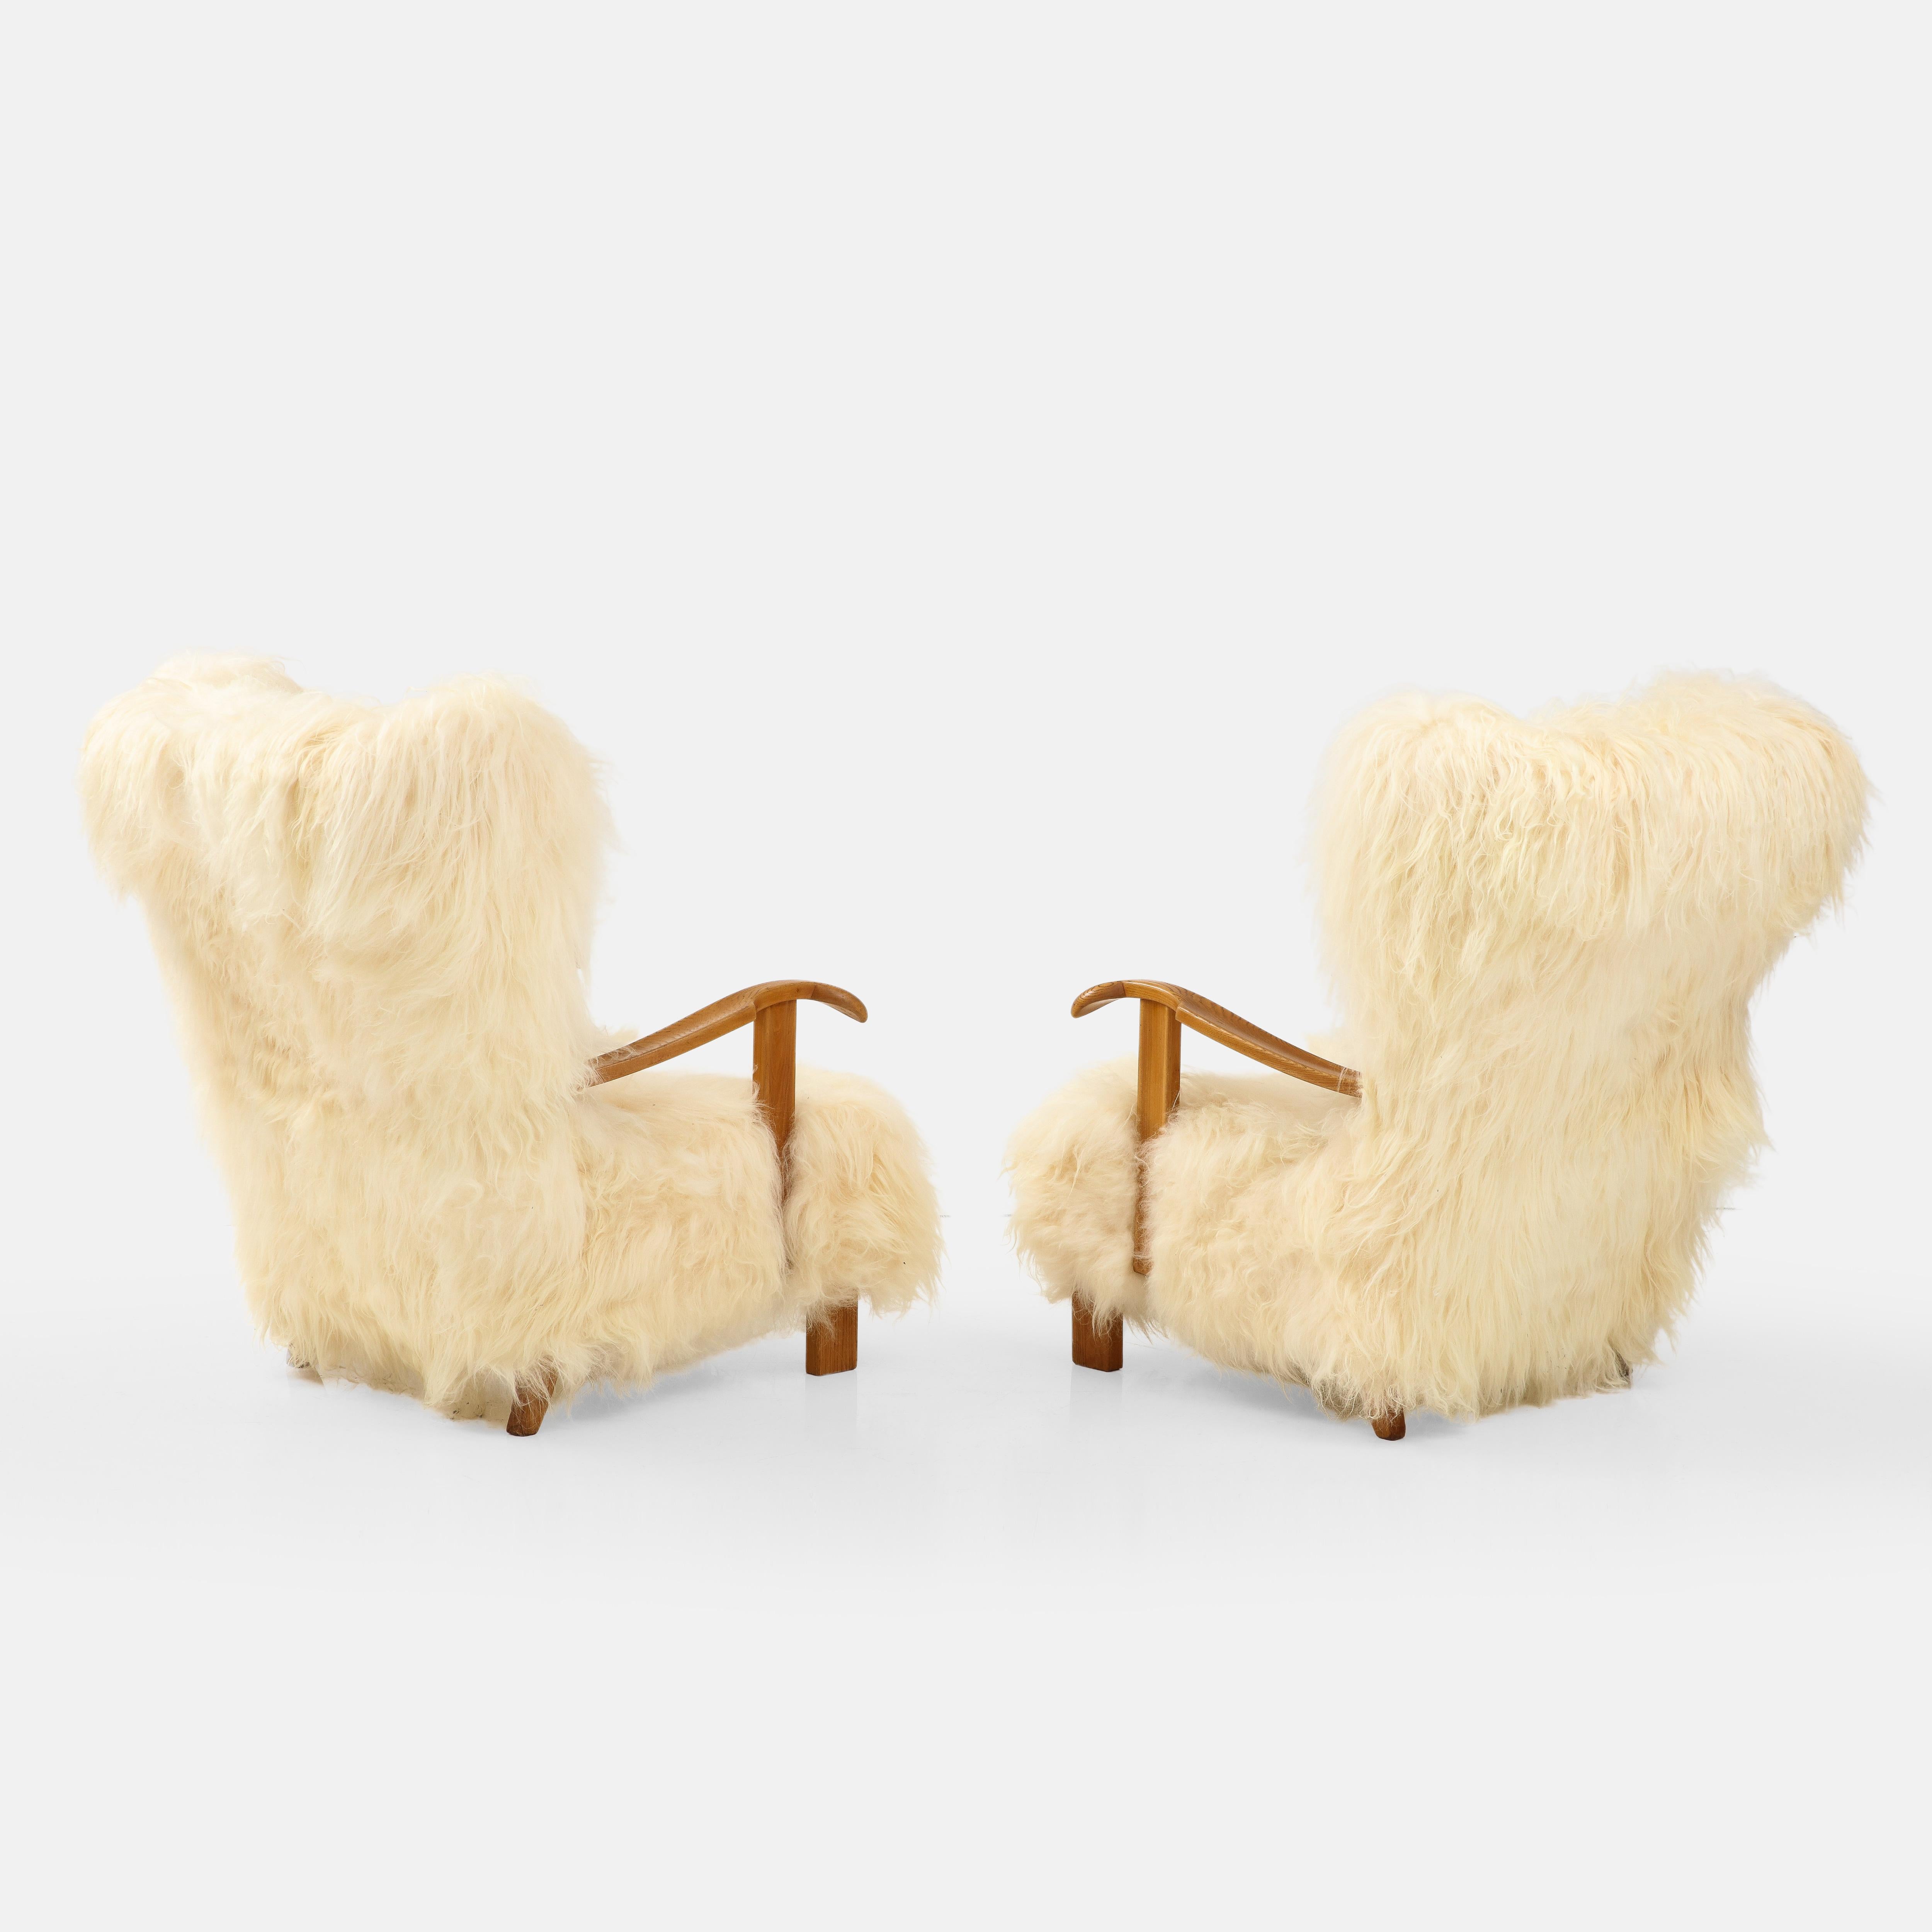 Fritz Hansen Rare Pair of Wingback Lounge Chairs Model 1582 in Sheepskin, 1930s For Sale 2